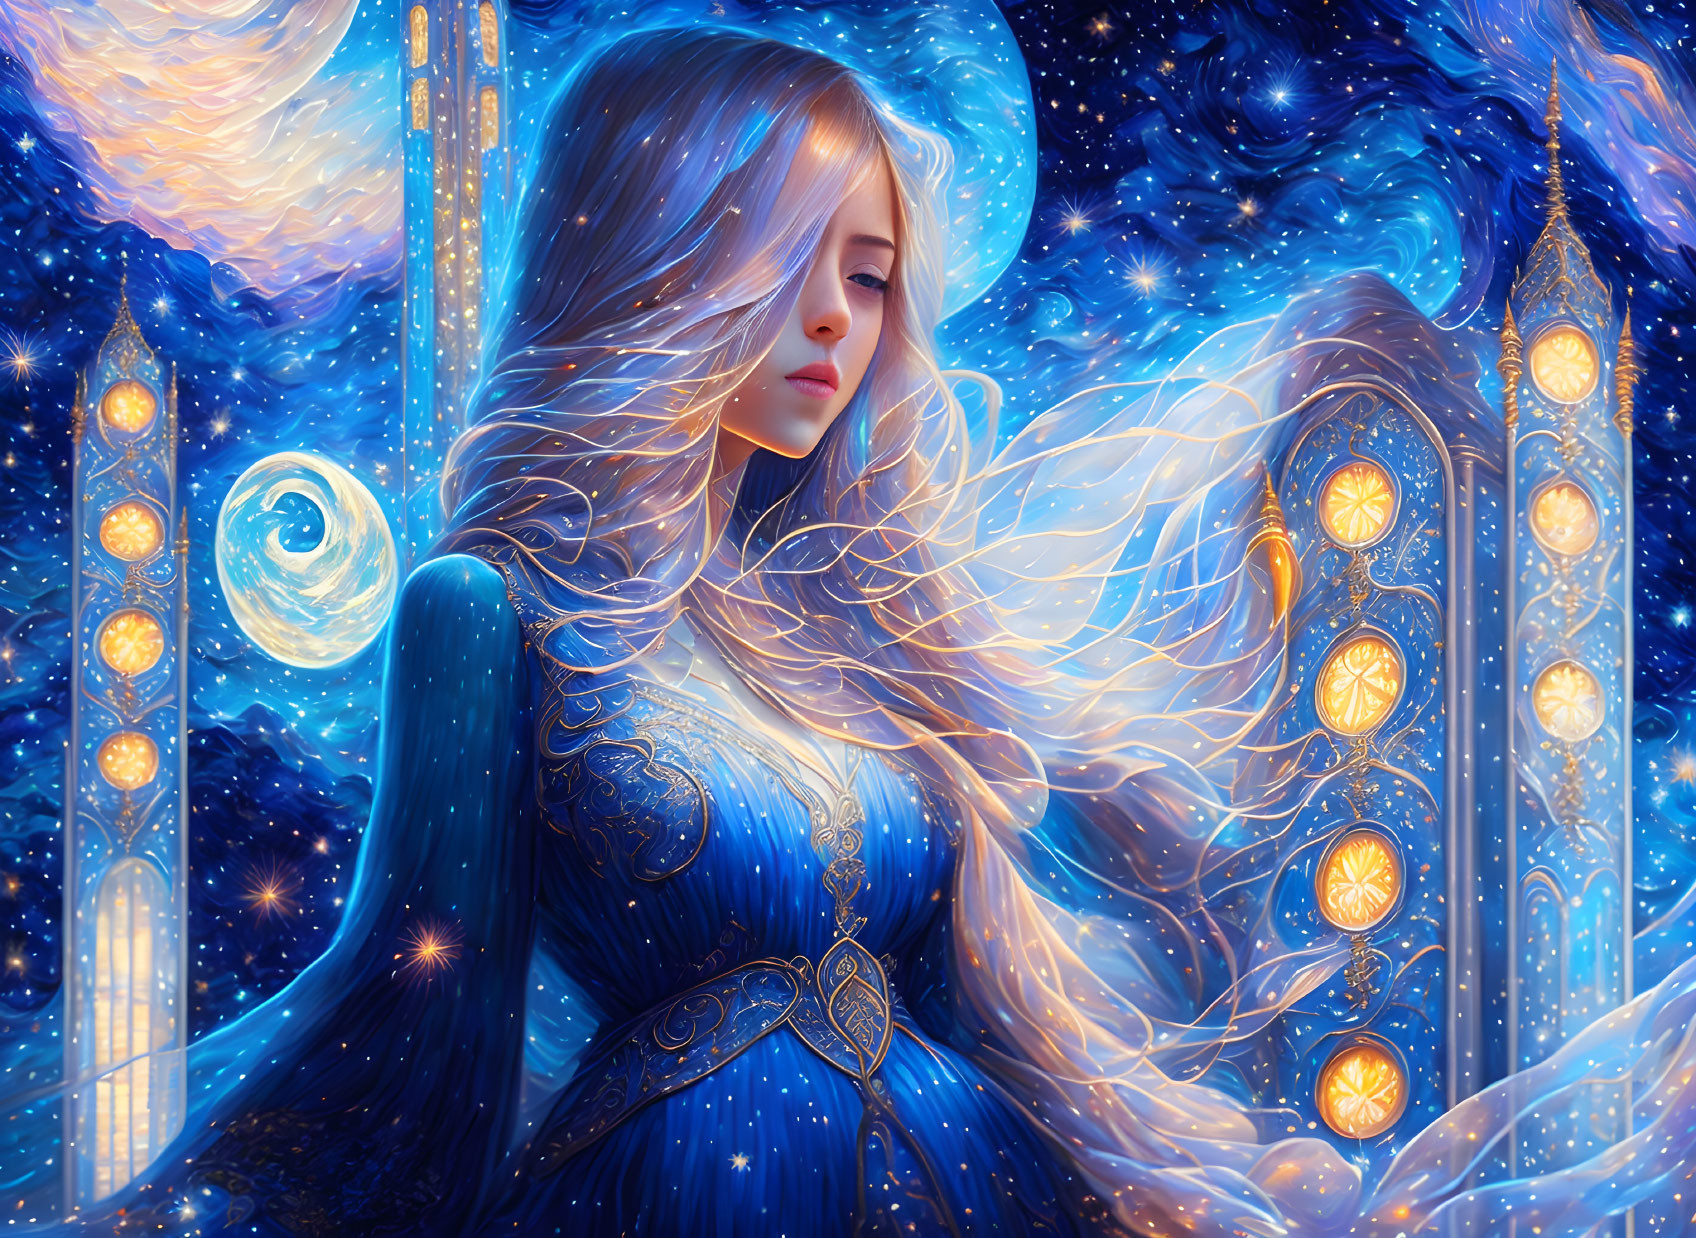 Illustration of woman with flowing hair in celestial background